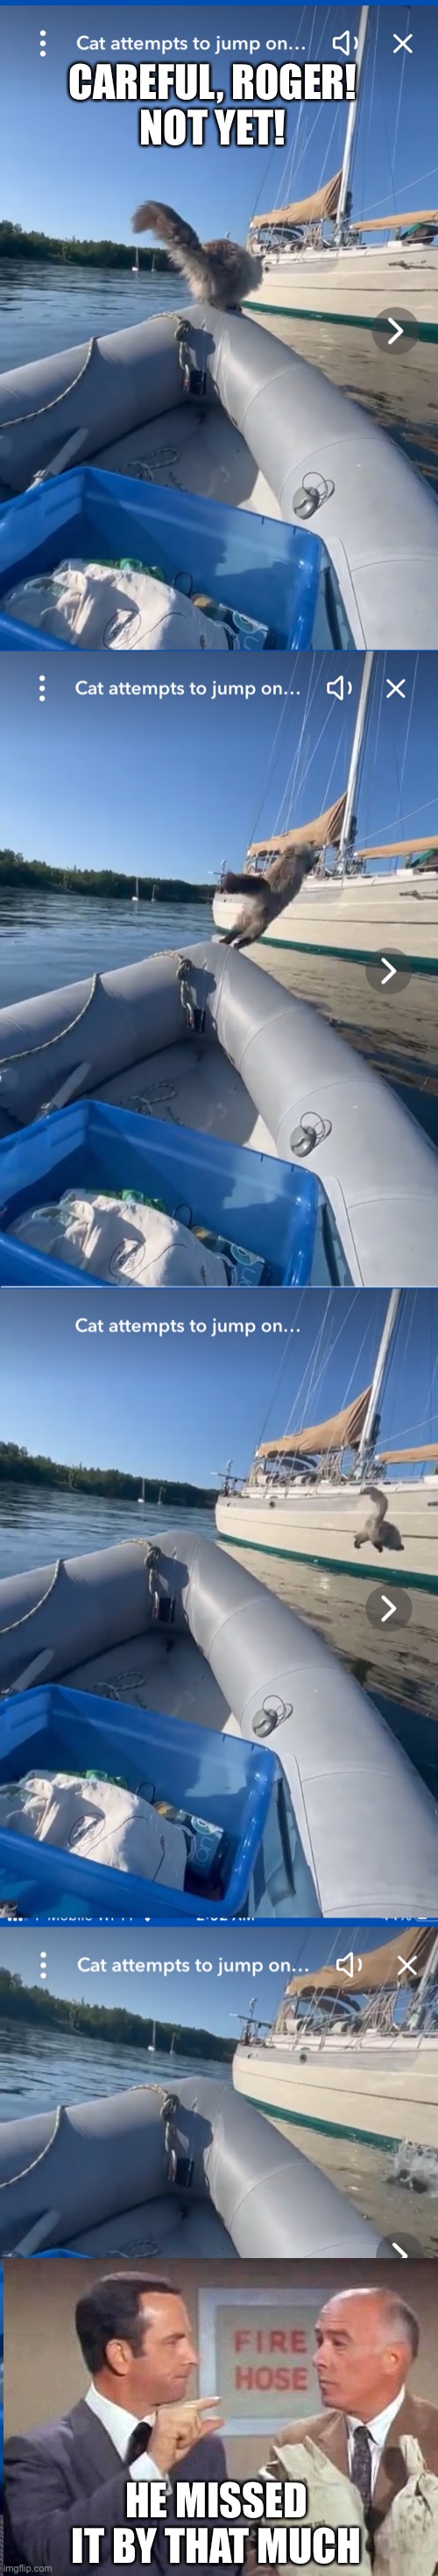 https://www.msn.com/en-us/video/animals/not-yet-fearless-cat-attempts-to-jump-from-dinghy-to-sailboat-instantly-regrets-it/vi-AA | CAREFUL, ROGER!
NOT YET! HE MISSED IT BY THAT MUCH | image tagged in cat,jump,boat,roger | made w/ Imgflip meme maker